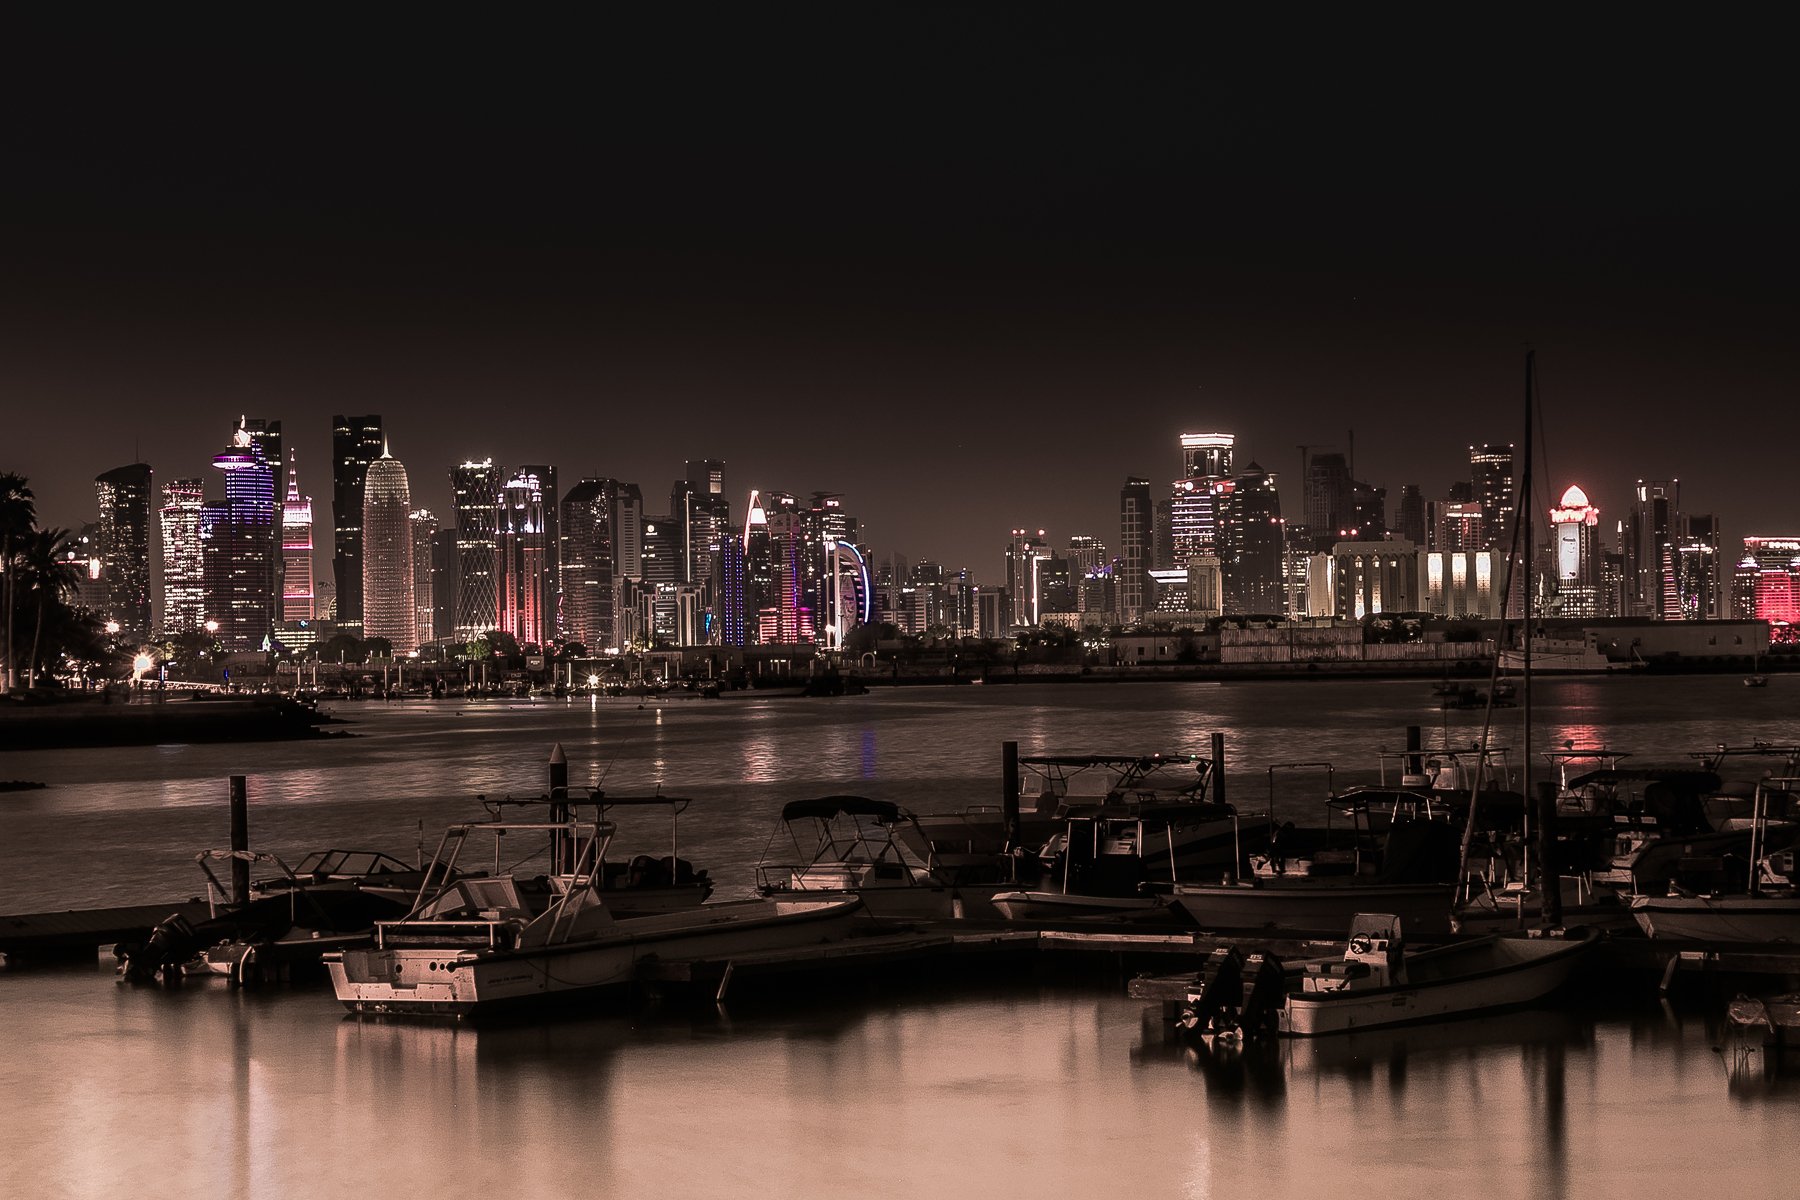  #doha #qatar #nationalday #downtown #downtown #qatar #light #light_shot #night #landscape #seascape #clouds #midnight #d #500px #500pxphoto #35awards #city #home #shades #view #beautiful #landscape #me #happy #enjoy #life #iphone #pictures #december, Moutaz Fino